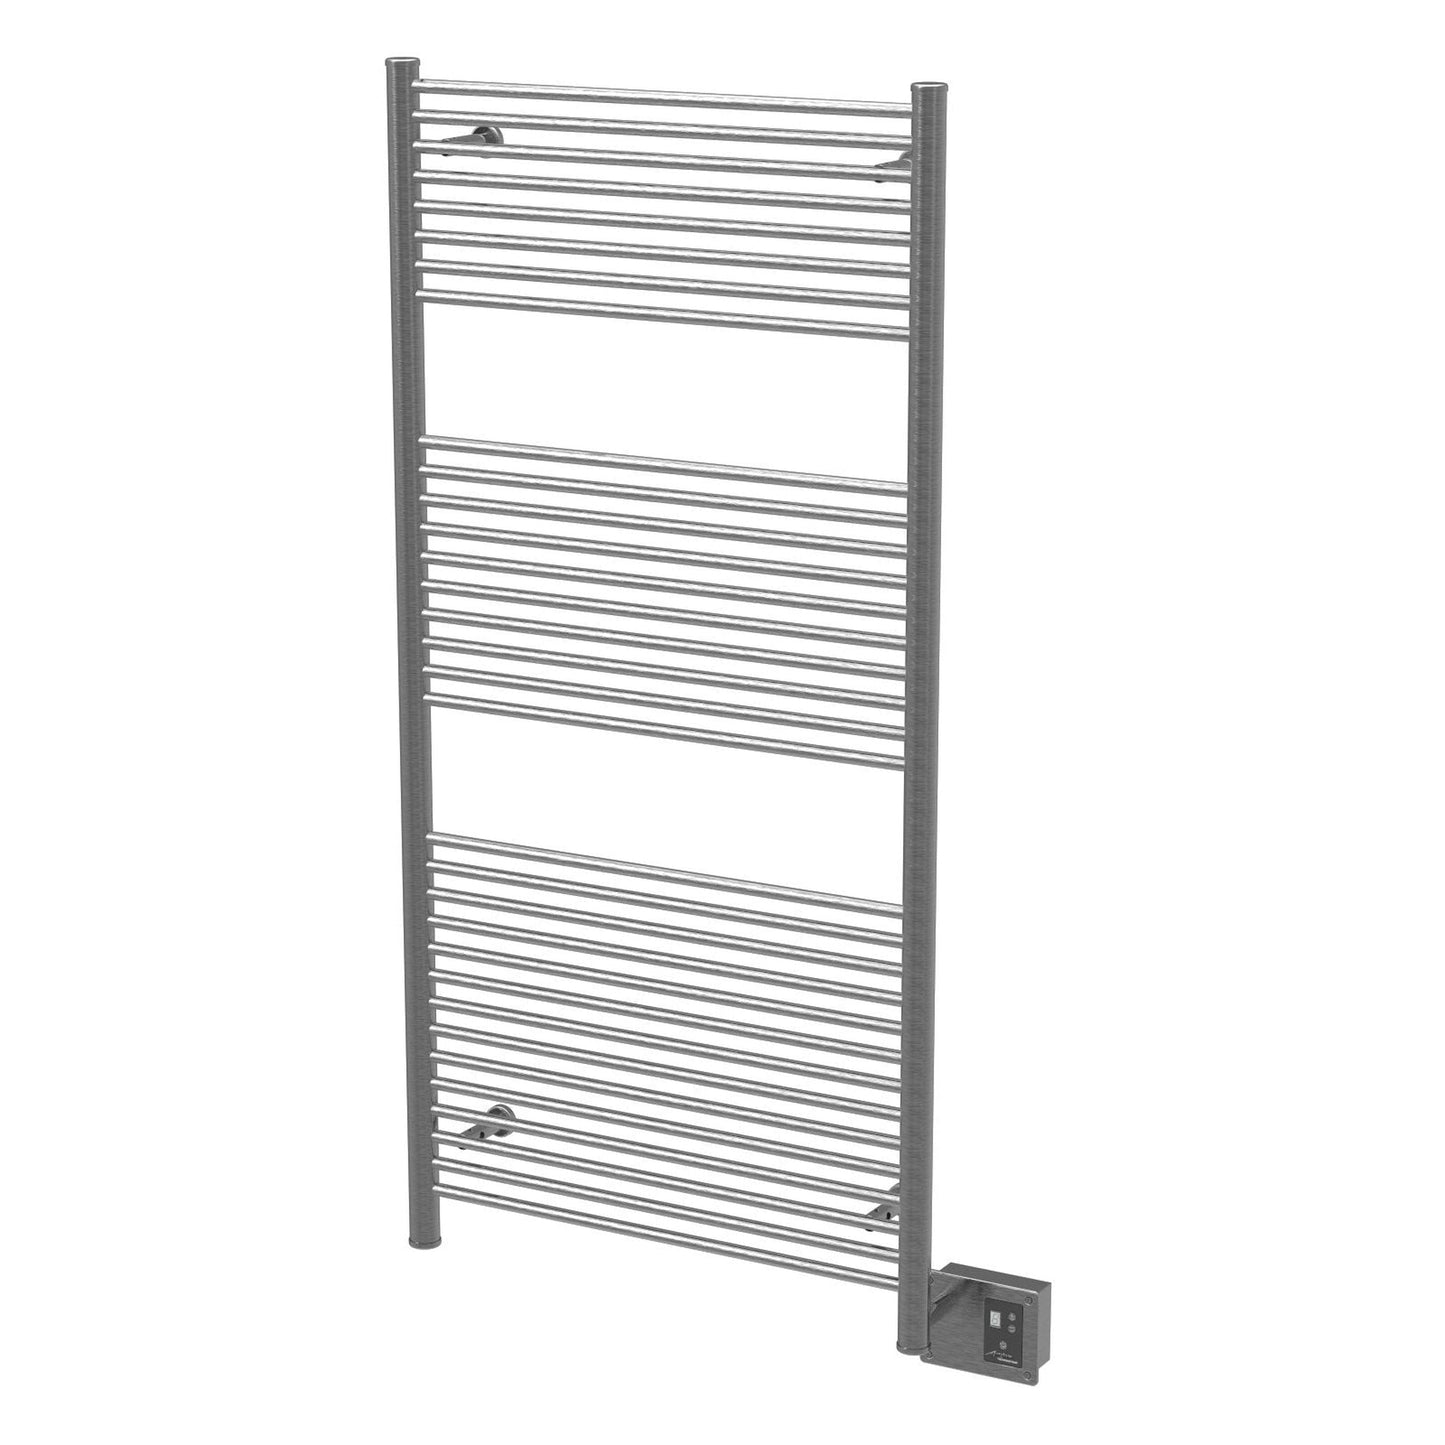 Amba Antus 32" x 58" 32-Bar Harwired Towel Warmer in Brushed Stainless Steel